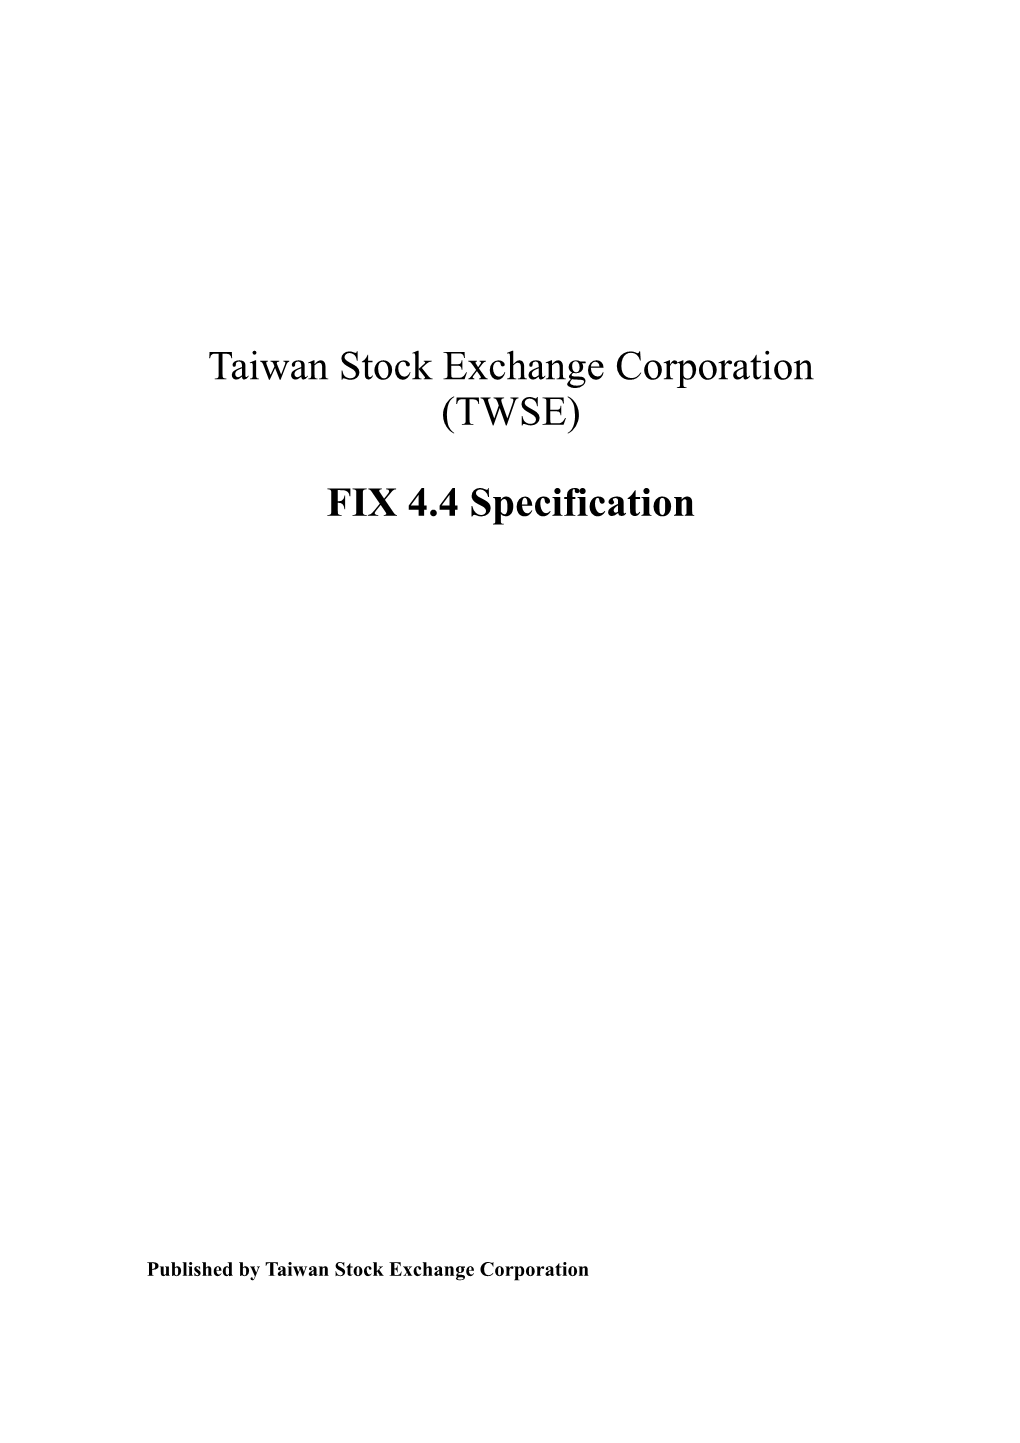 TWSE FIX 4.4 Specification